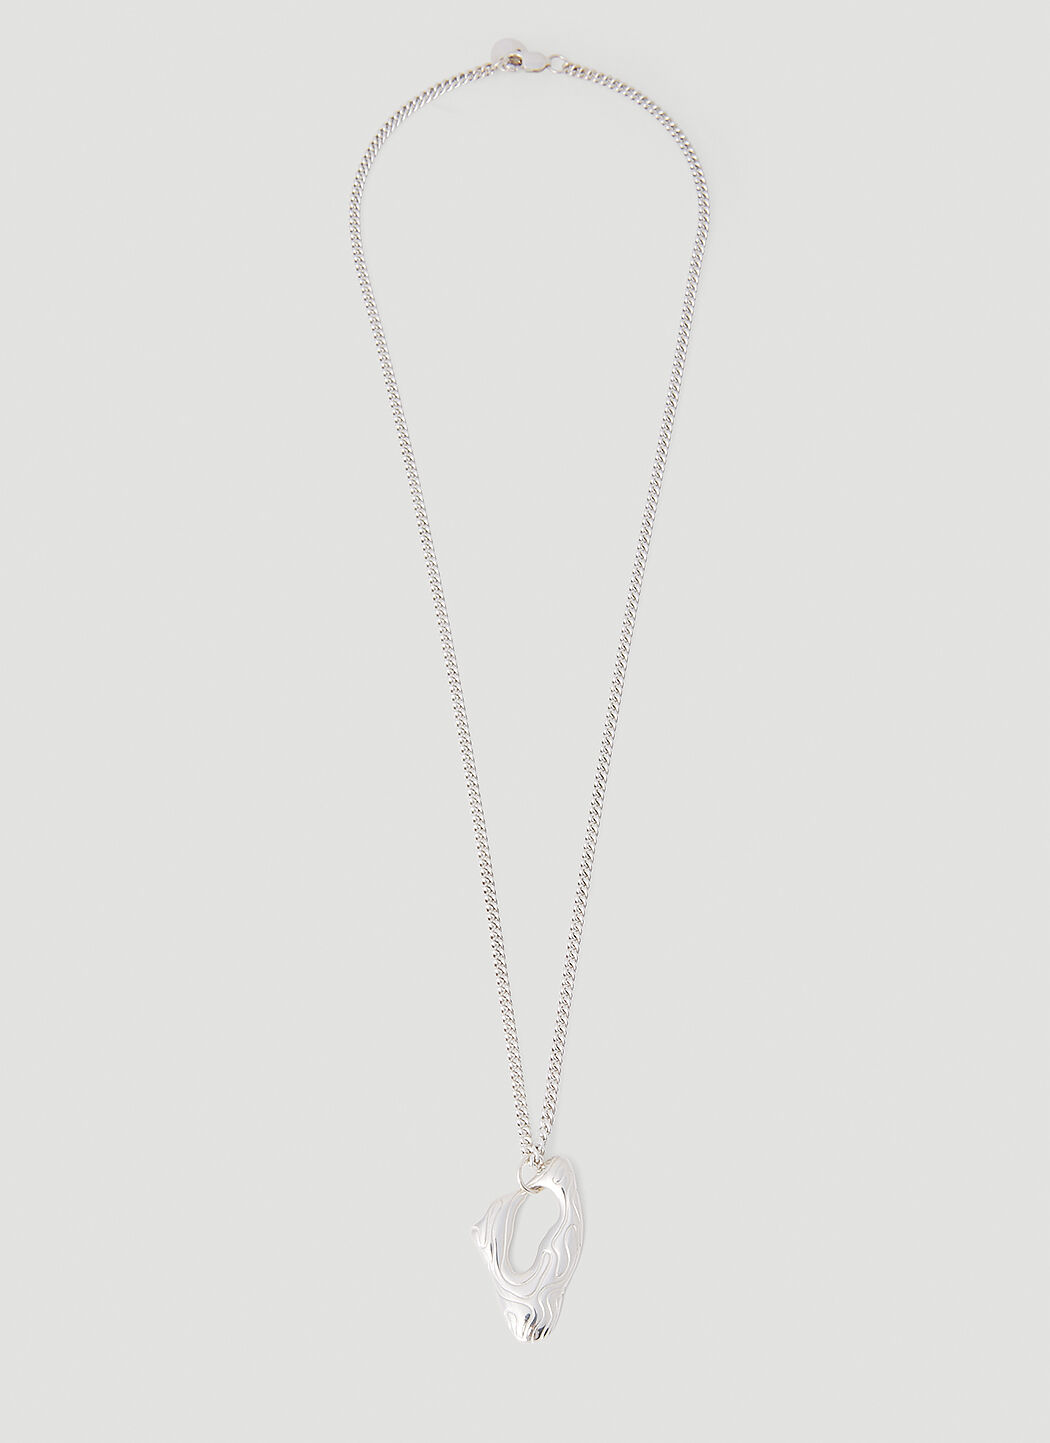 Octi Jewellery for Women: Silver Earrings & Necklaces | LN-CC®